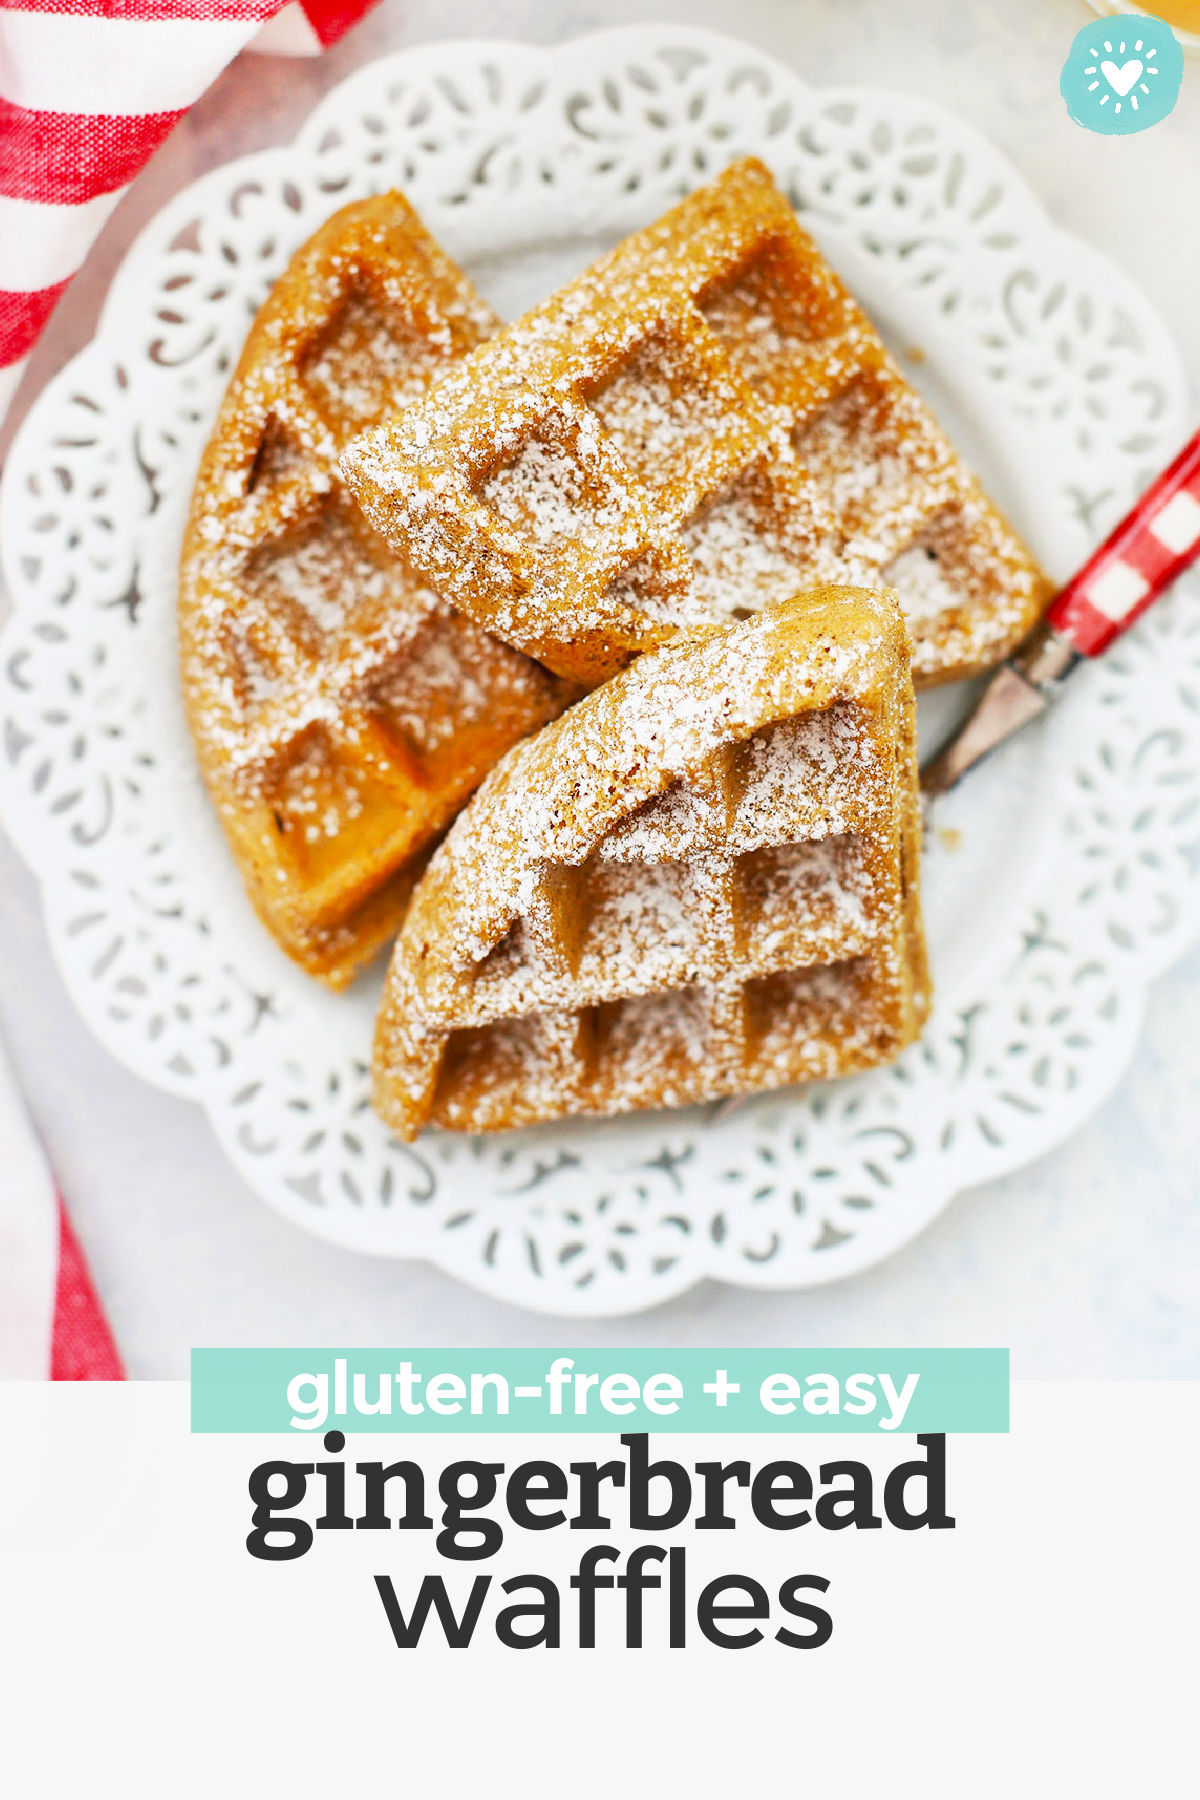 Gluten Free Gingerbread Waffles - crispy exterior, fluffy interior, and perfectly spiced. The perfect holiday breakfast! (Gluten free, dairy free)// gluten free Holiday breakfast // gluten free Christmas breakfast // gluten free waffles recipe // #waffles #gingebread #glutenfree #brunch #breakfast